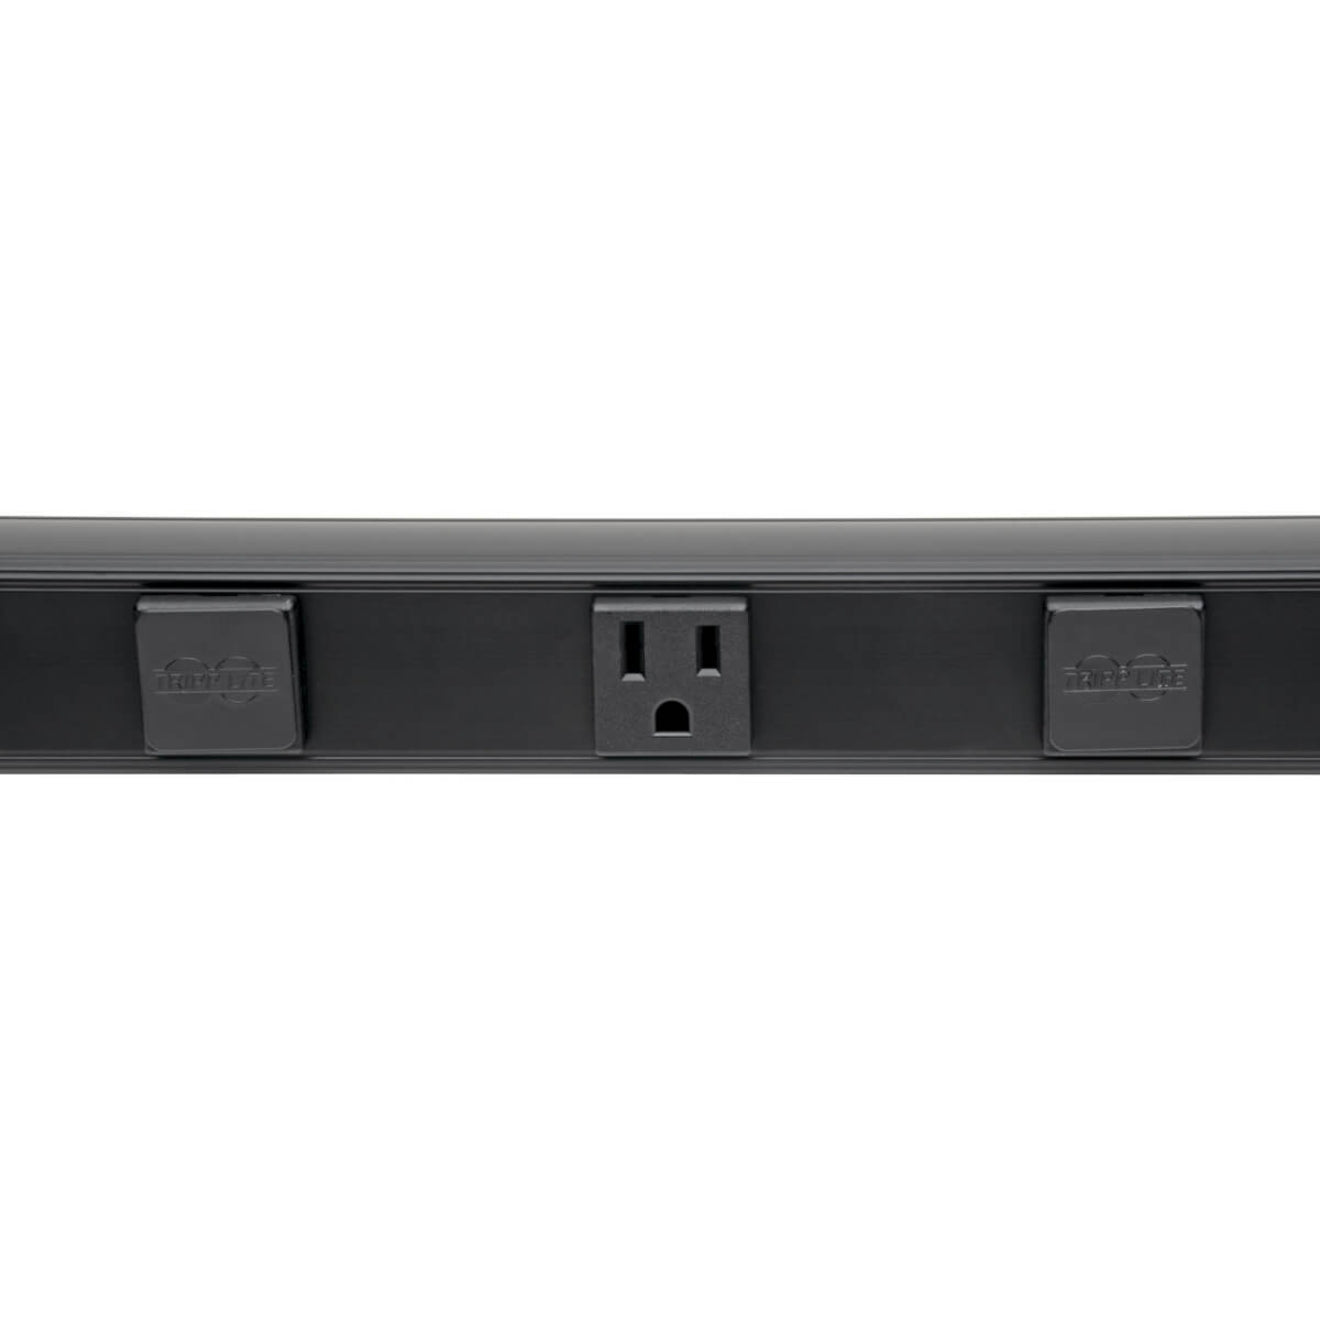 Tripp Lite 4-Outlet Power Strip Right-Angle NEMA 5-15R 15A 120V 6 ft. (1.83 m) Cord Right-Angle 5-15P Plug 24 in.